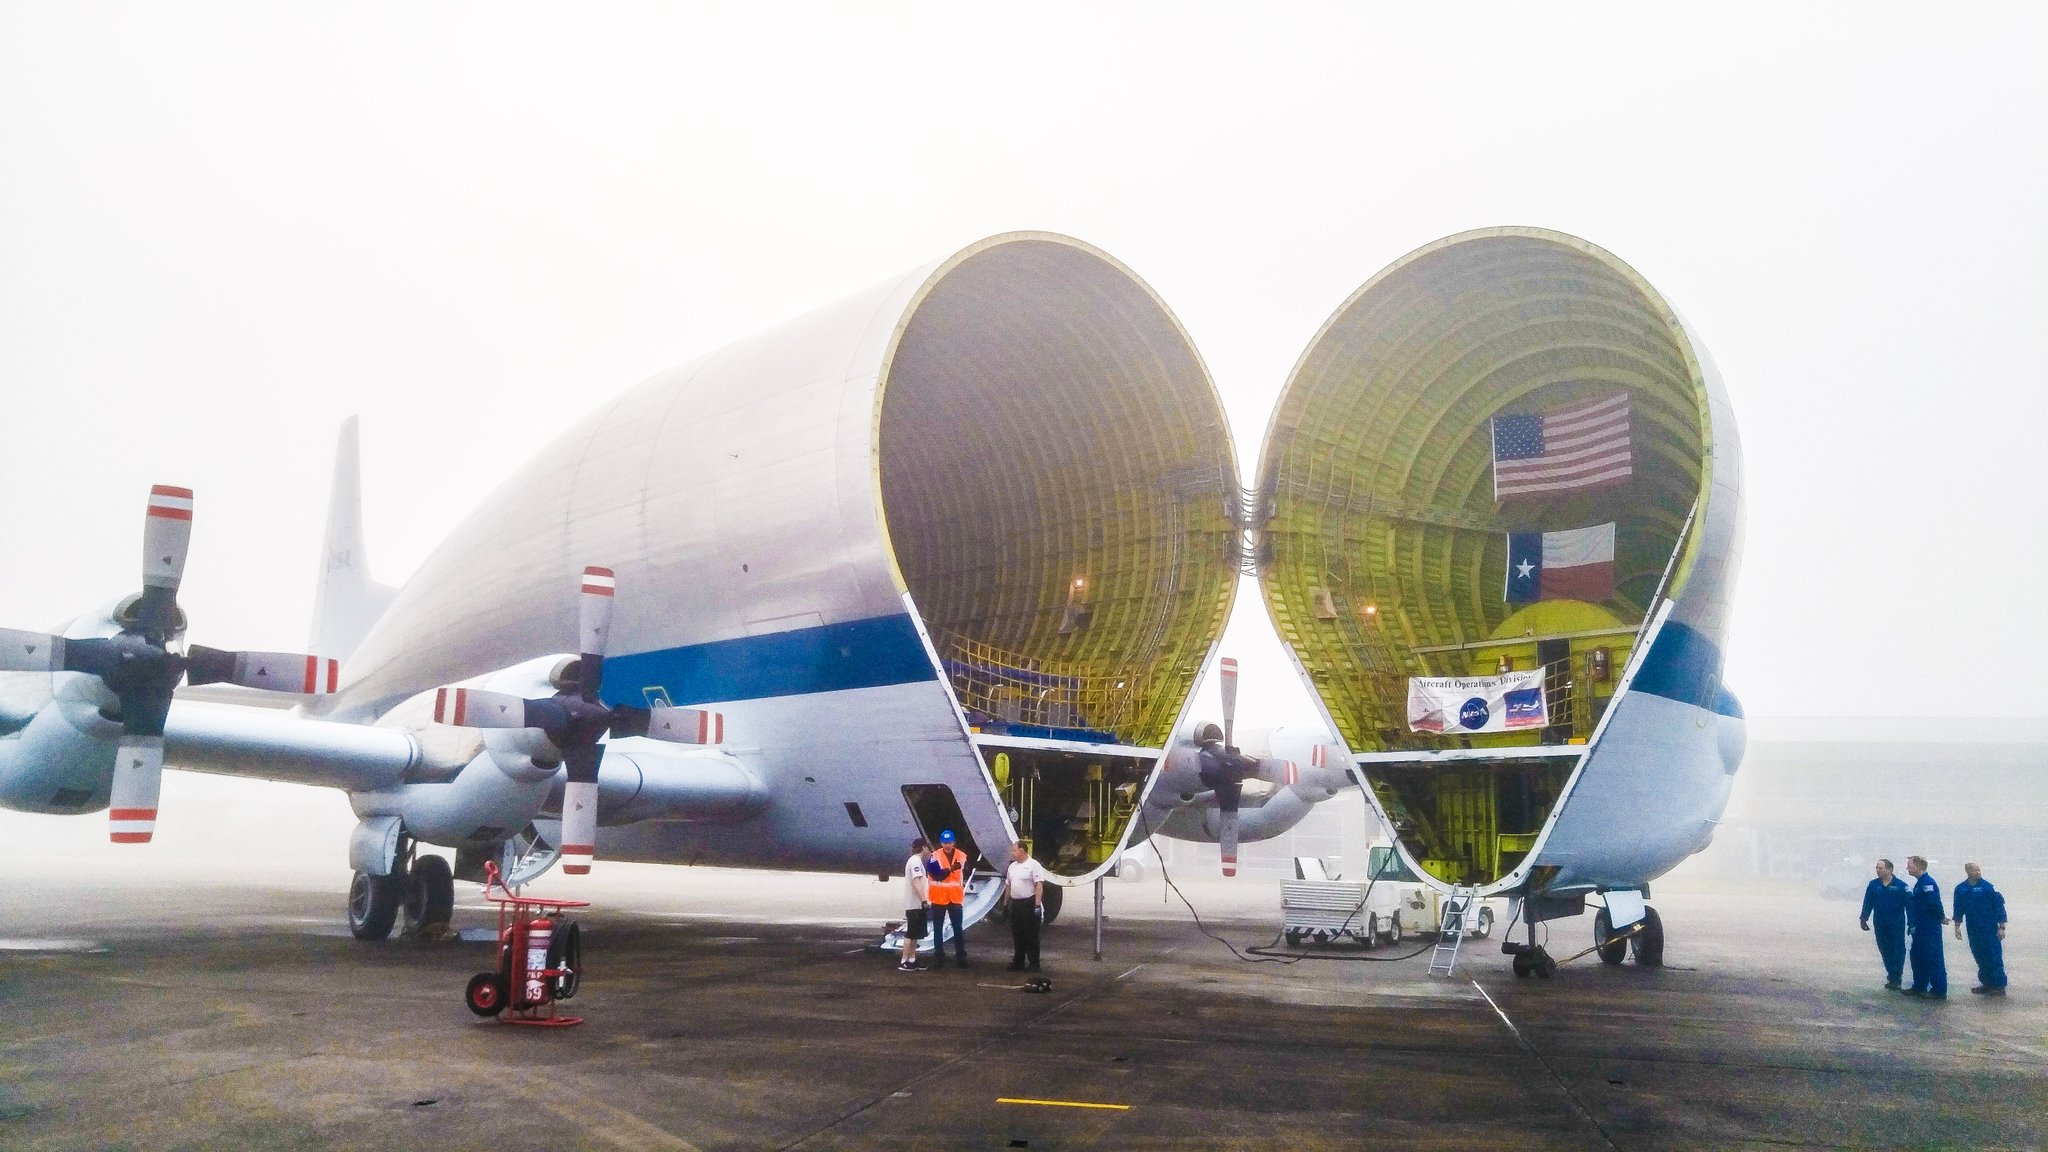 NASA’s Weird Giant Airplane Carried The Future Of Mars In Its Belly